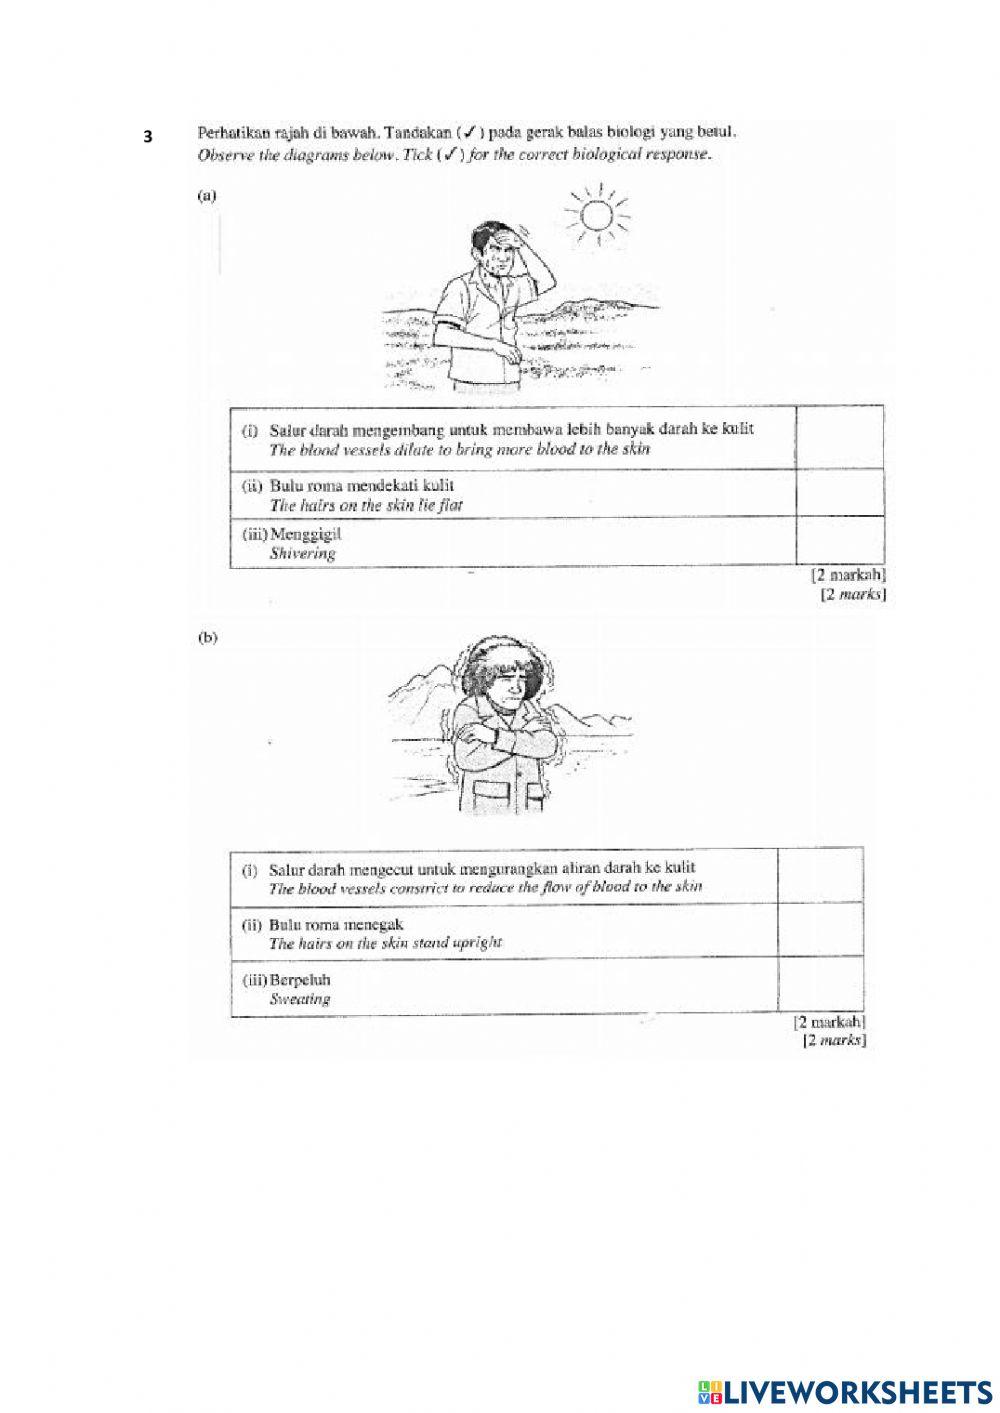 Exercise form 1